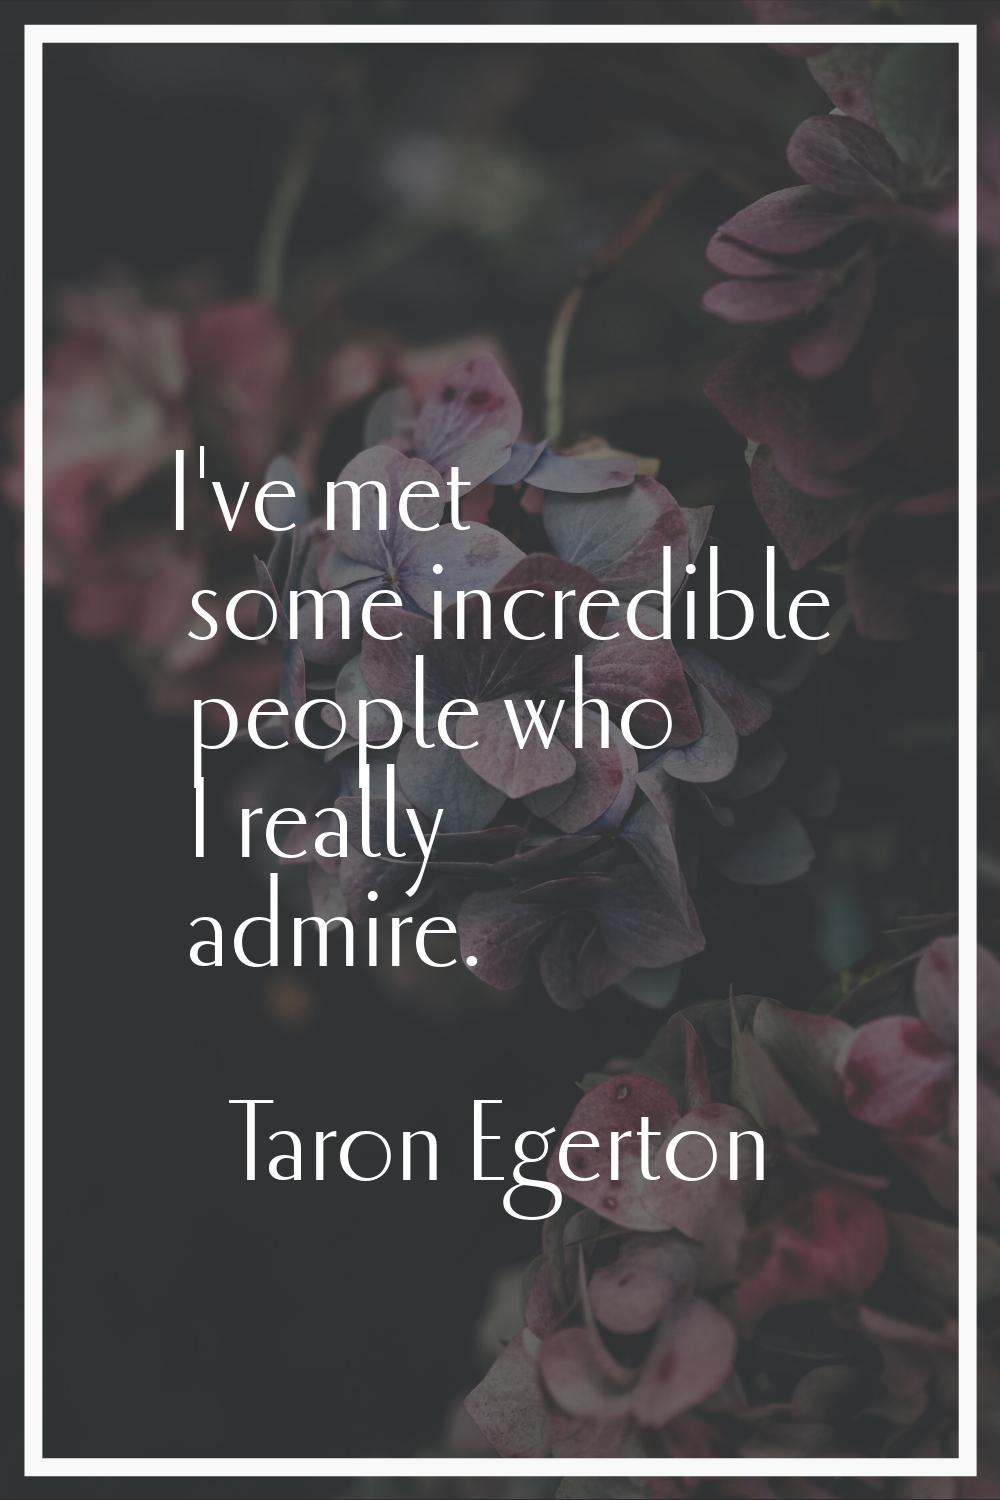 I've met some incredible people who I really admire.